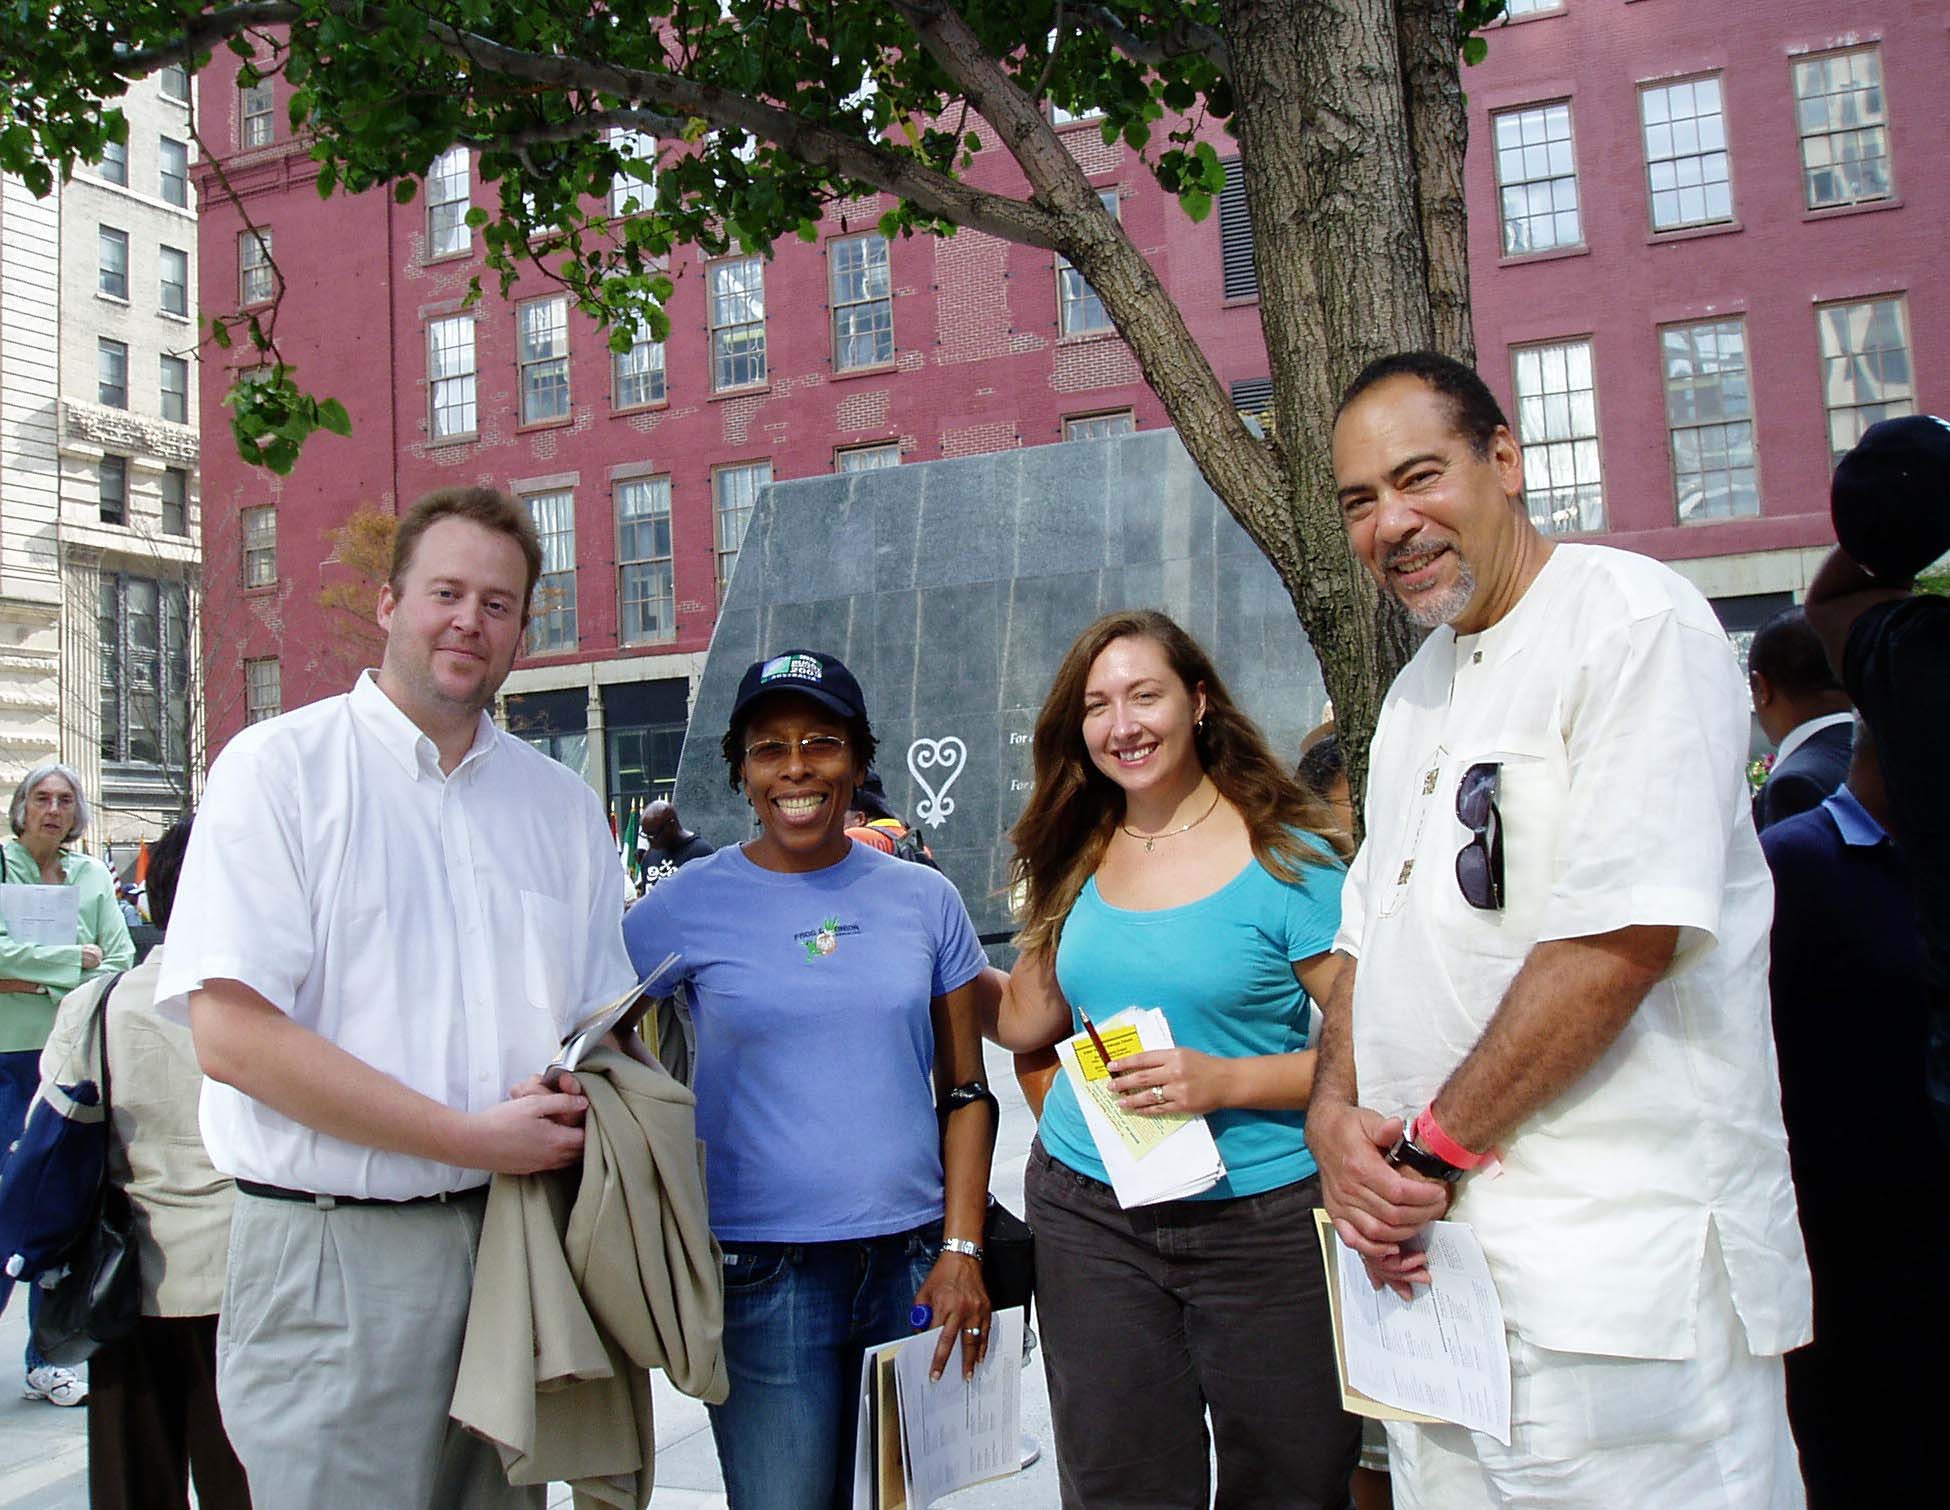 Graduate Research Associate Christopher Crain, Research Associate Grace Turner (PhD '12), and Associate Director Autumn Barrett (PhD '13) with Director Michael Blakey at the opening of the African Burial Ground National Monument (in background) in New York City in 2007